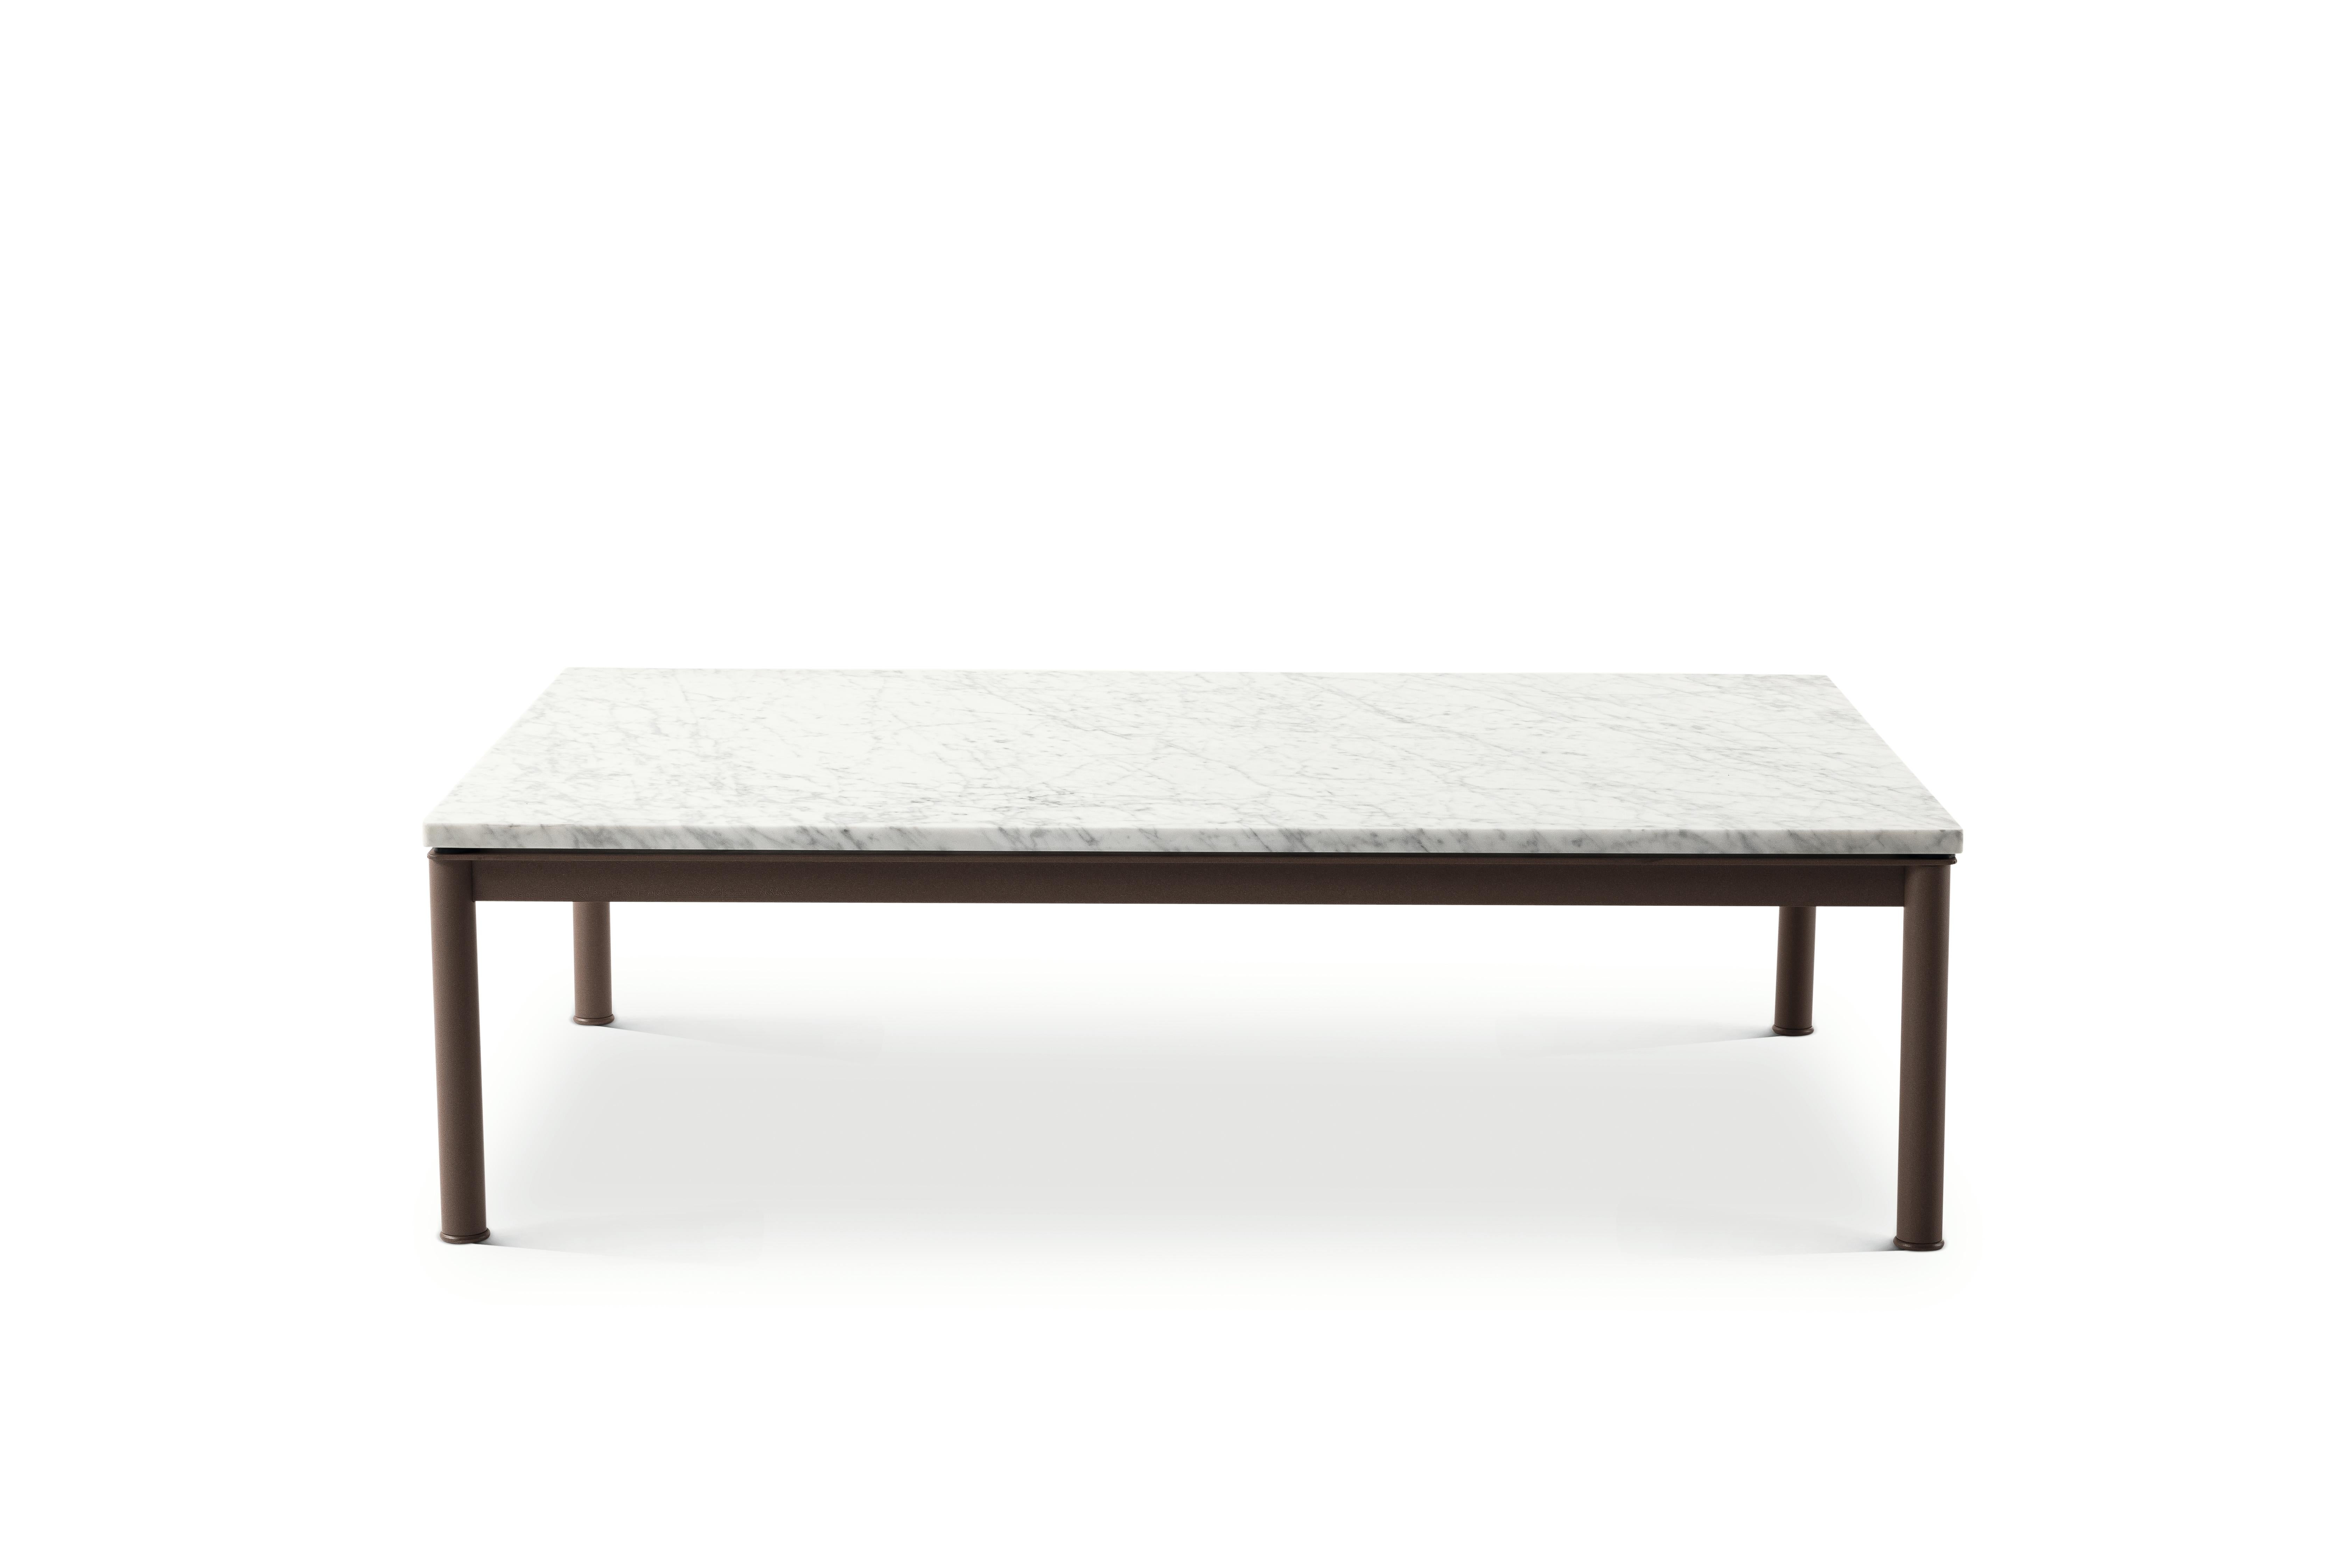 Steel Le Corbusier, Pierre Jeanneret, Charlotte Perriand Lc10 Ivory Table by Cassina For Sale